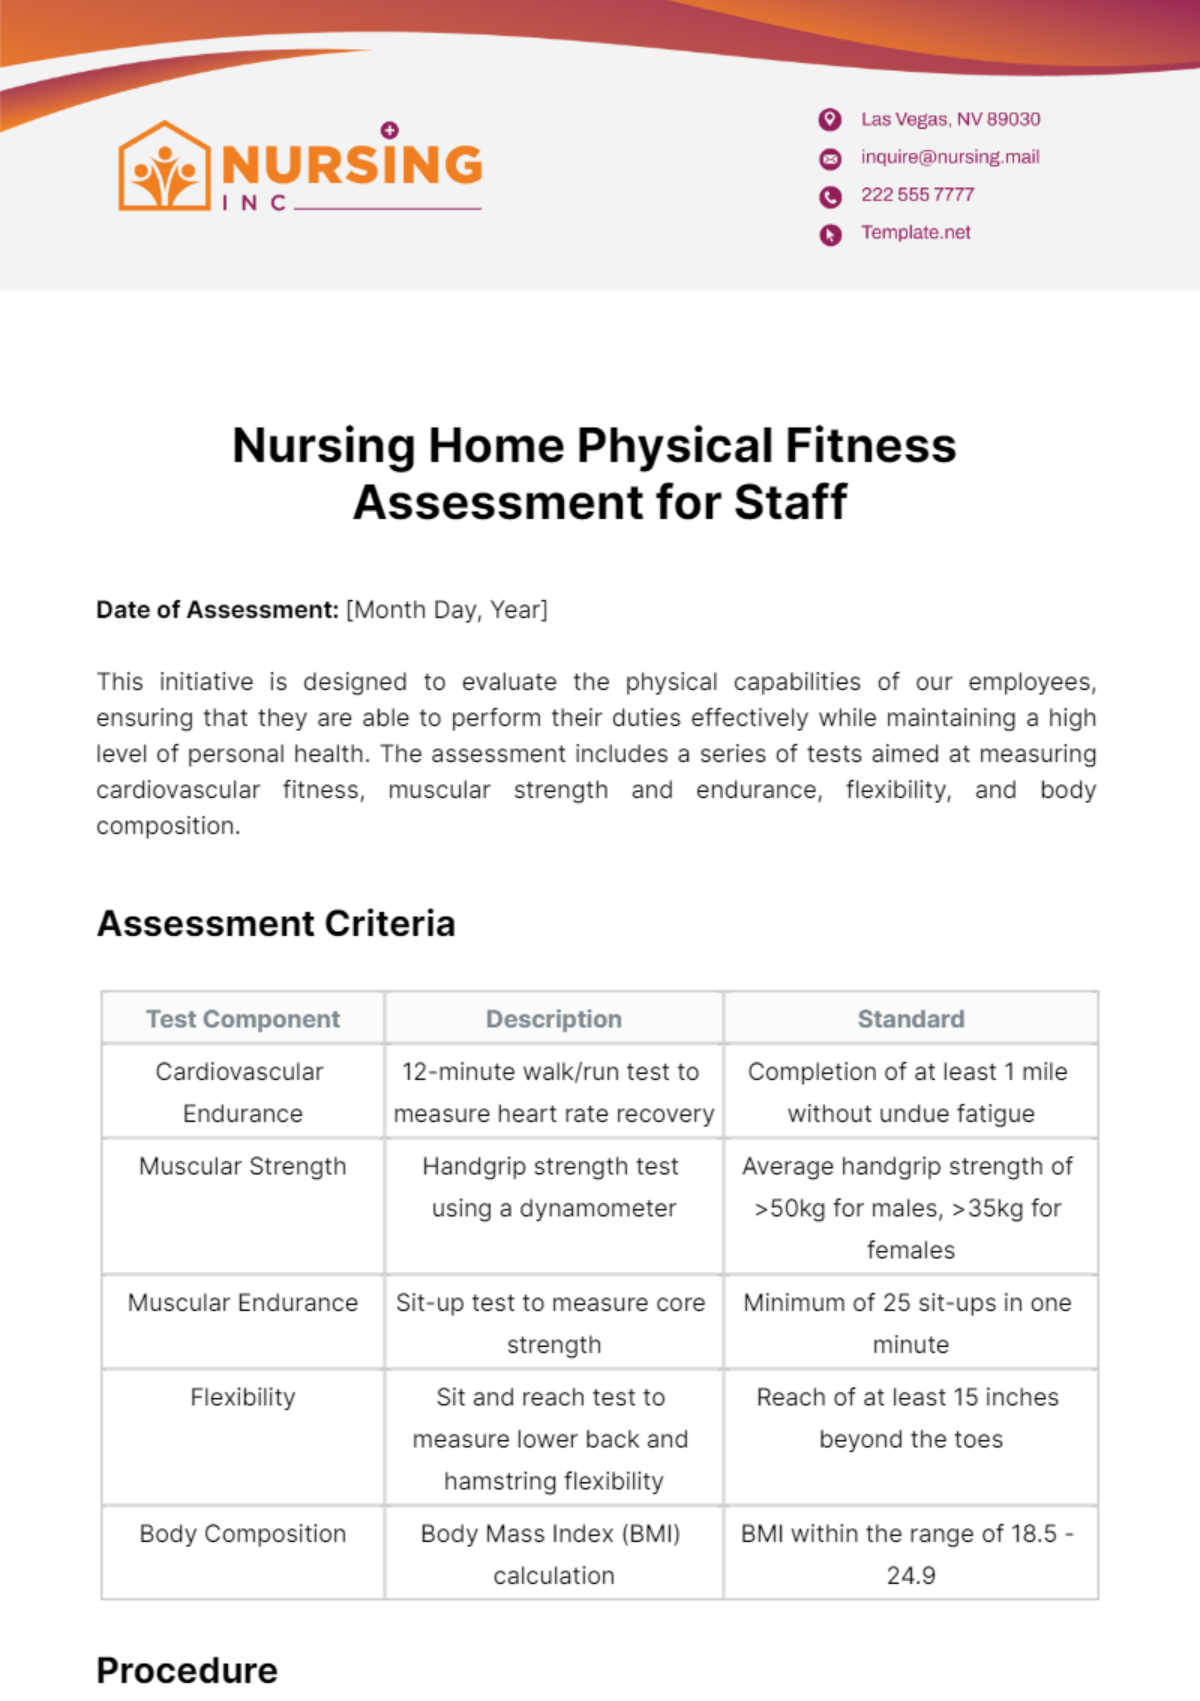 Free Nursing Home Physical Fitness Assessment for Staff Template